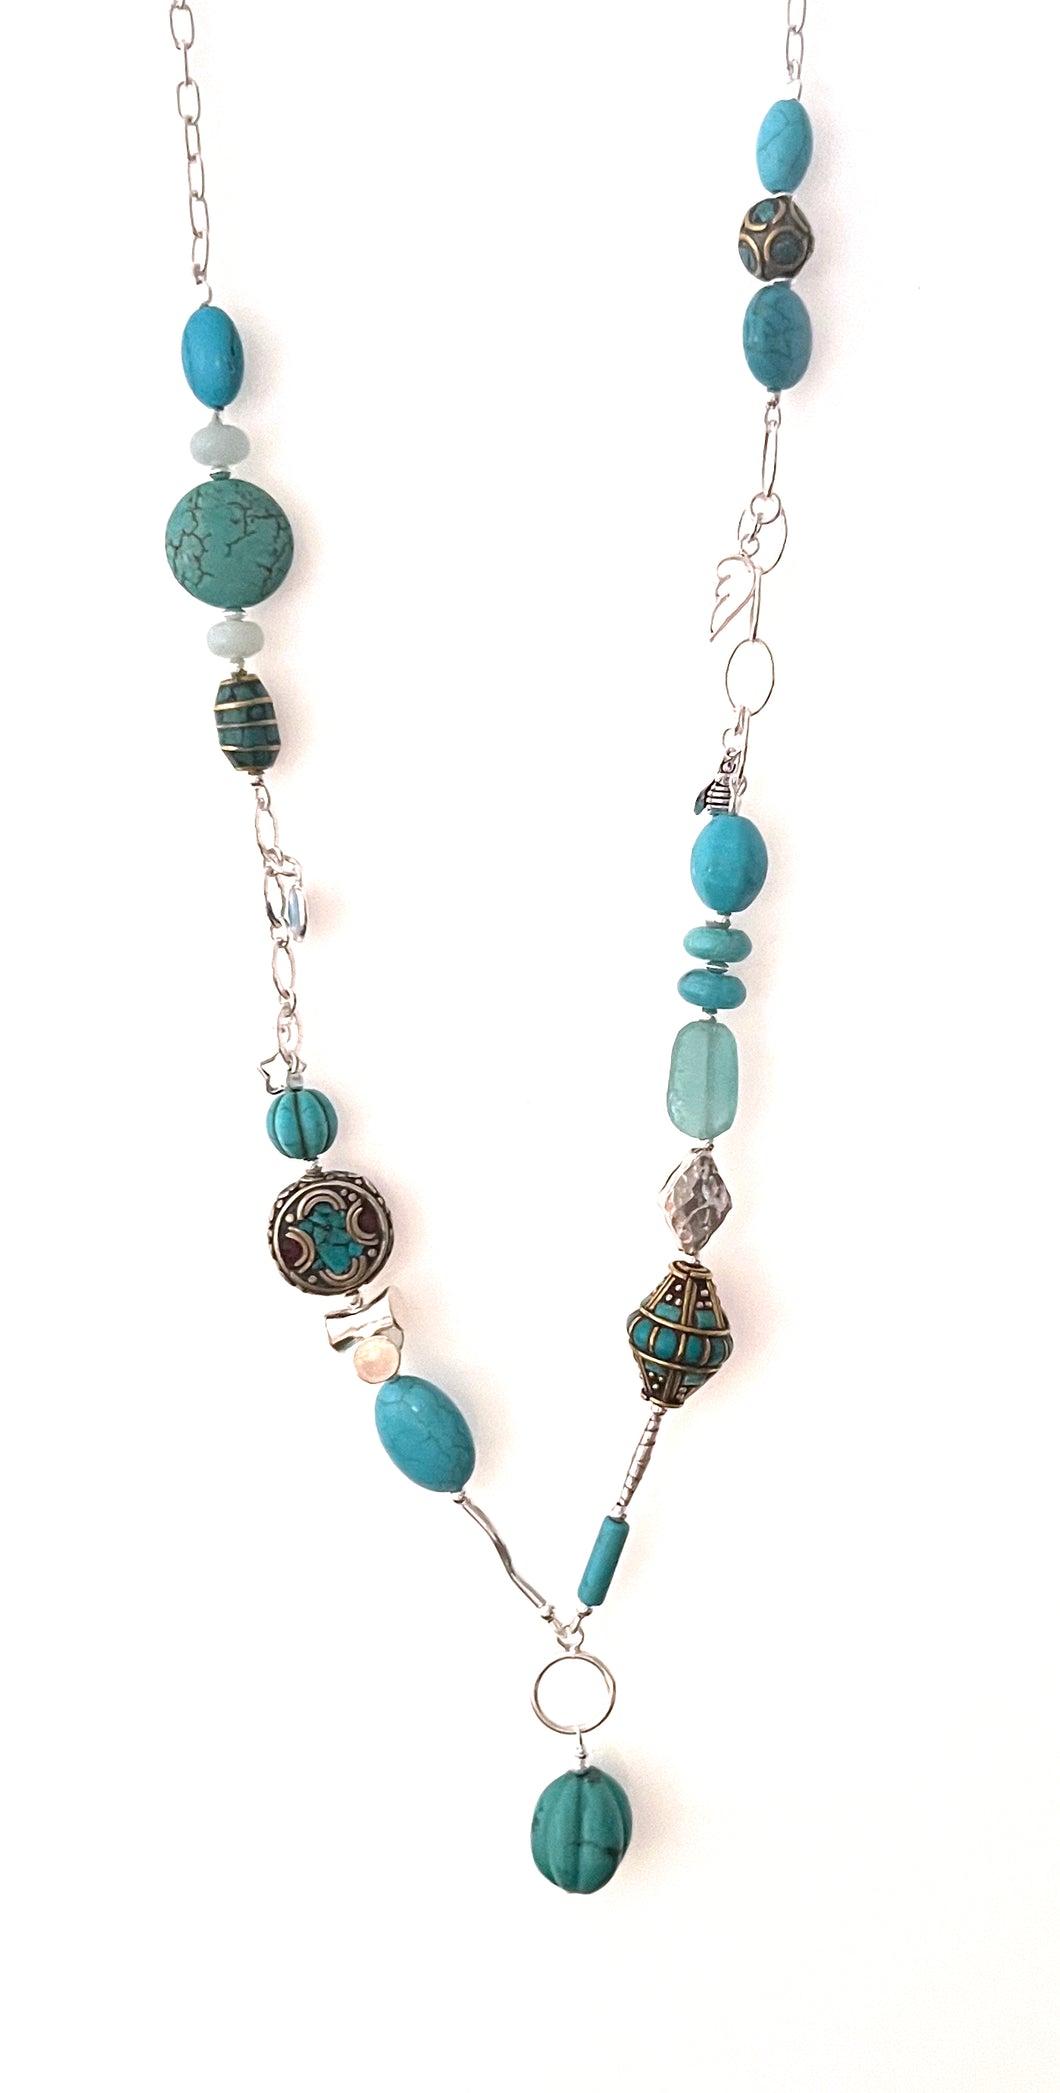 Australian Handmade Necklace with Howlite Amazonite Nepalese Beads Roman Glass Turquoise and Sterling Silver